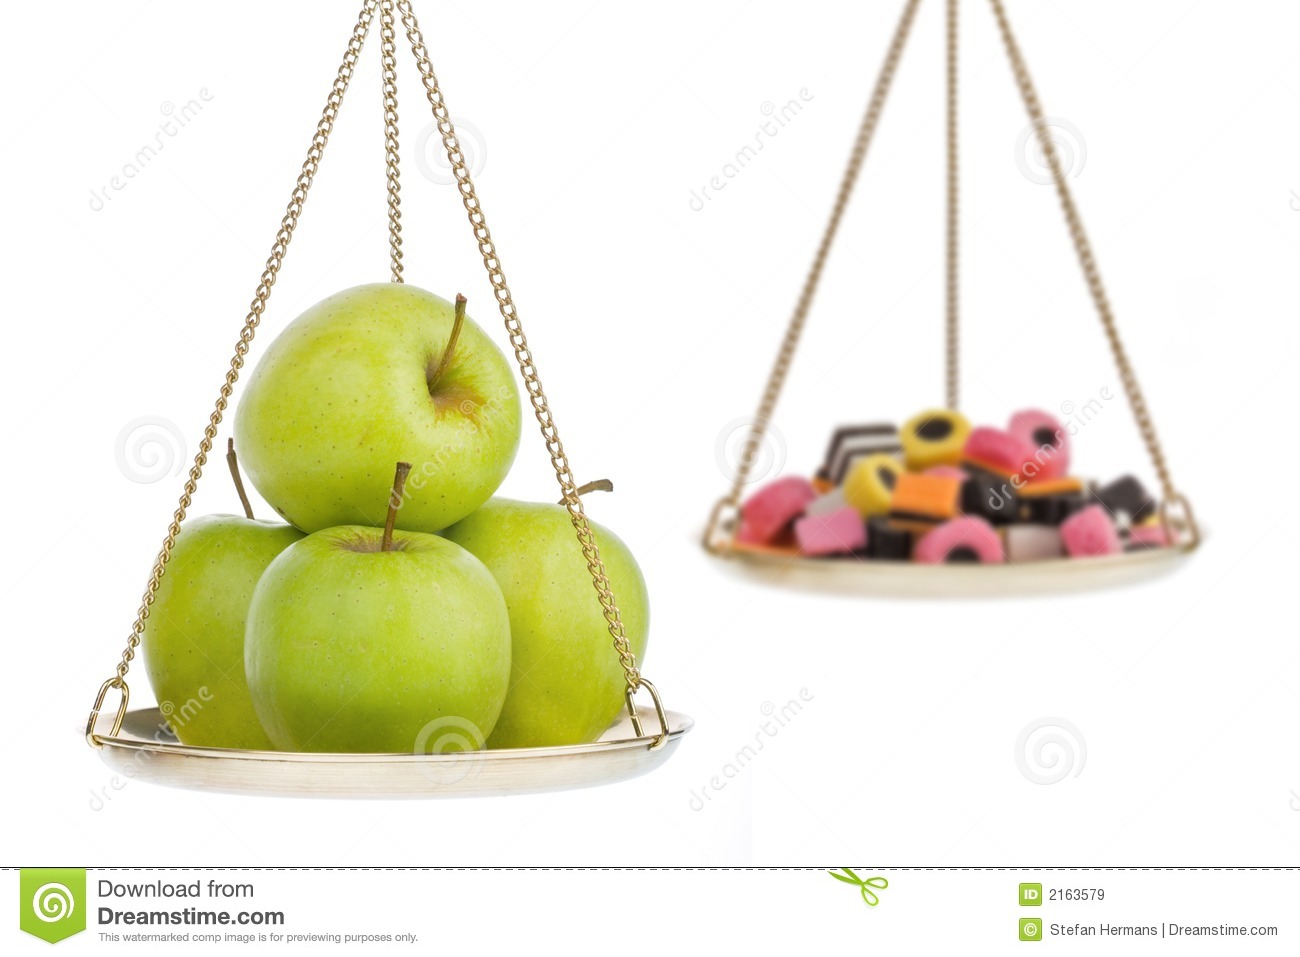 Healthy Living Clipart Healthy Lifestyle Metaphor